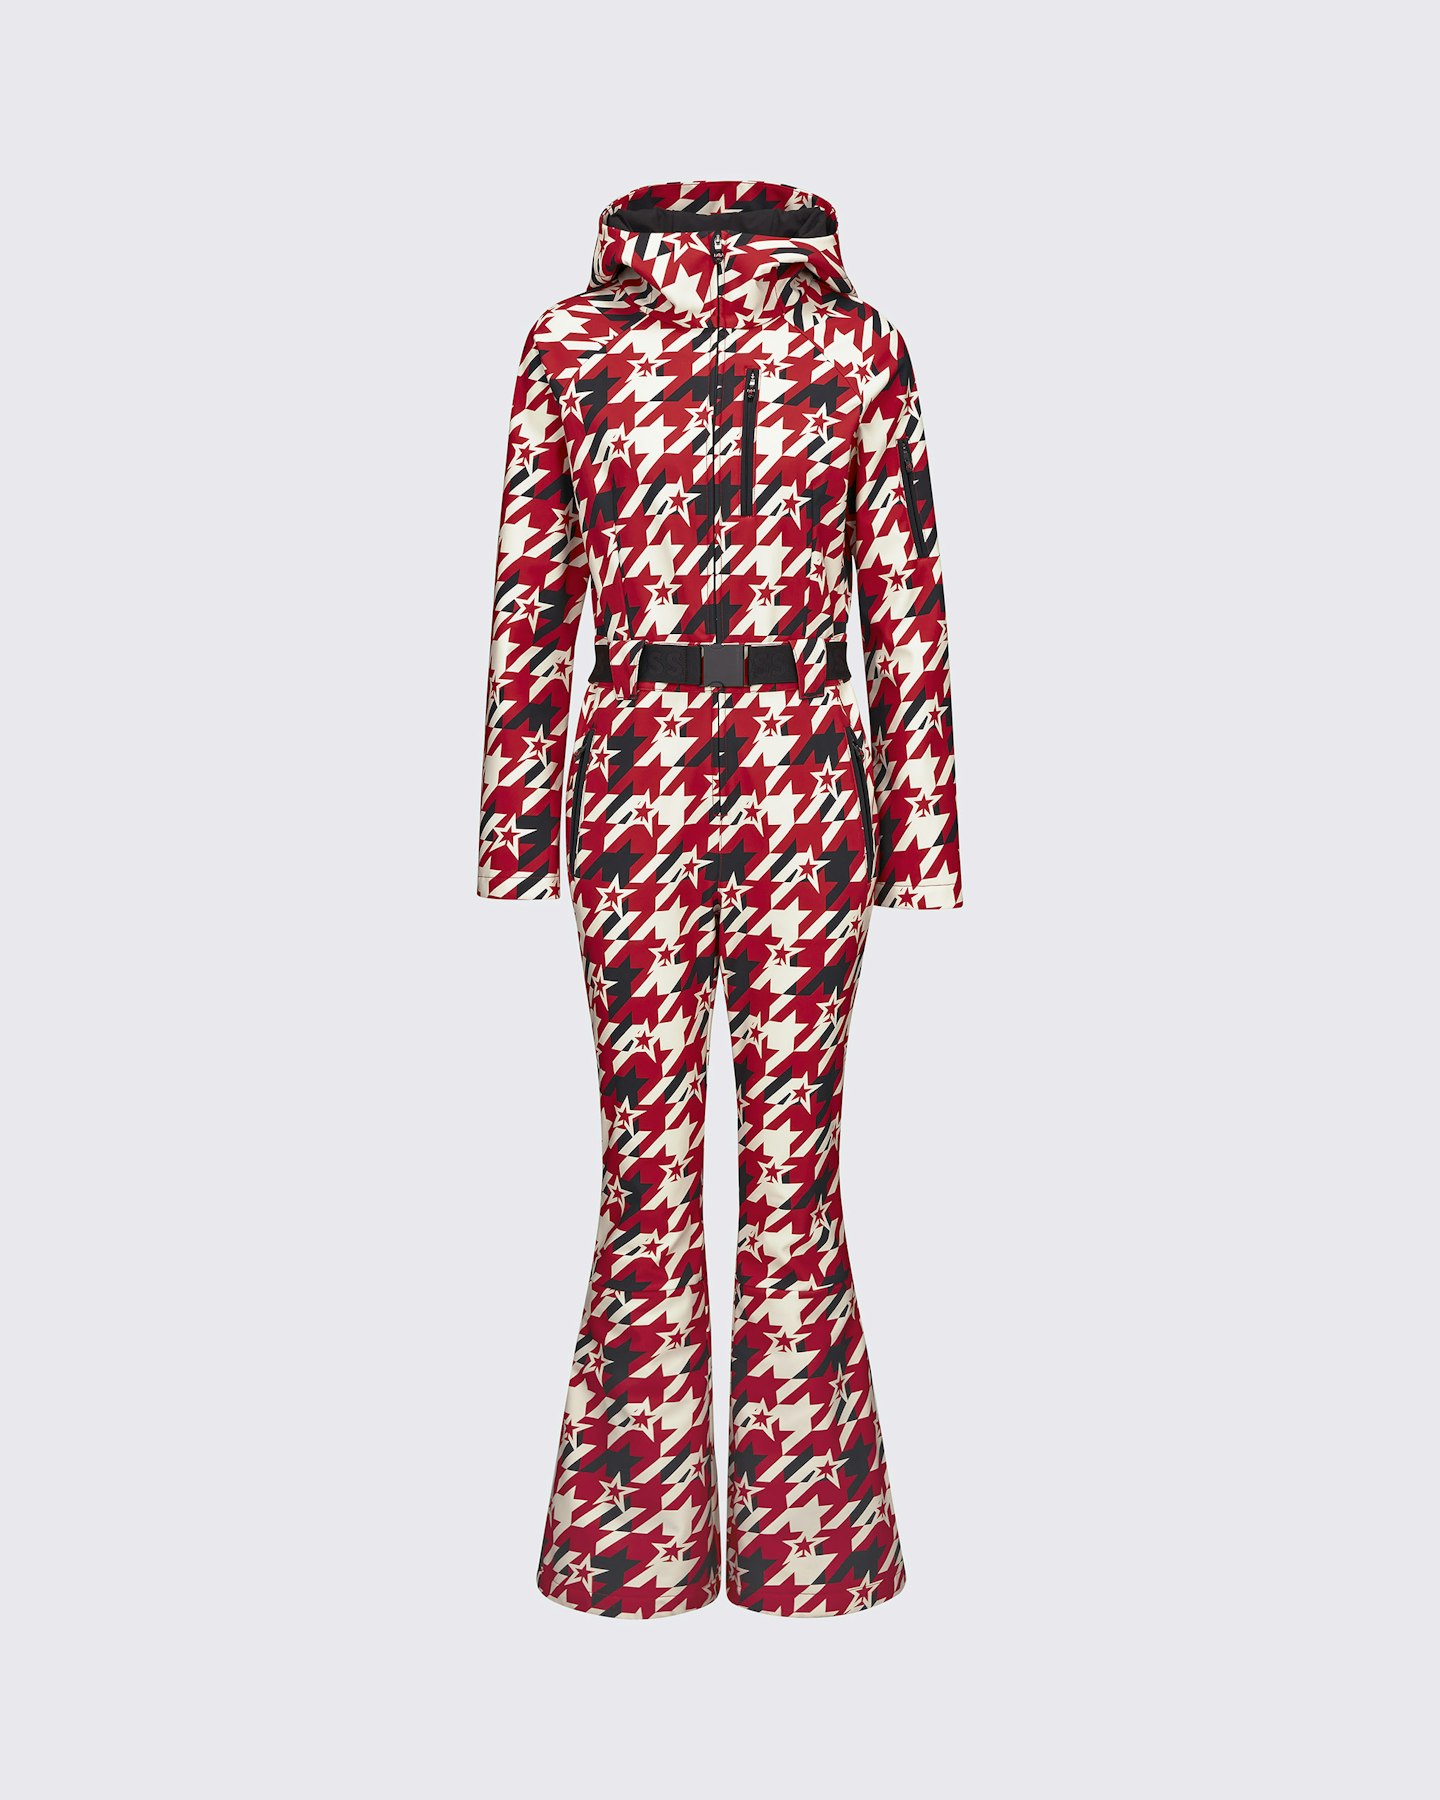 PM x BOSS Houndstooth Ski Suit 0